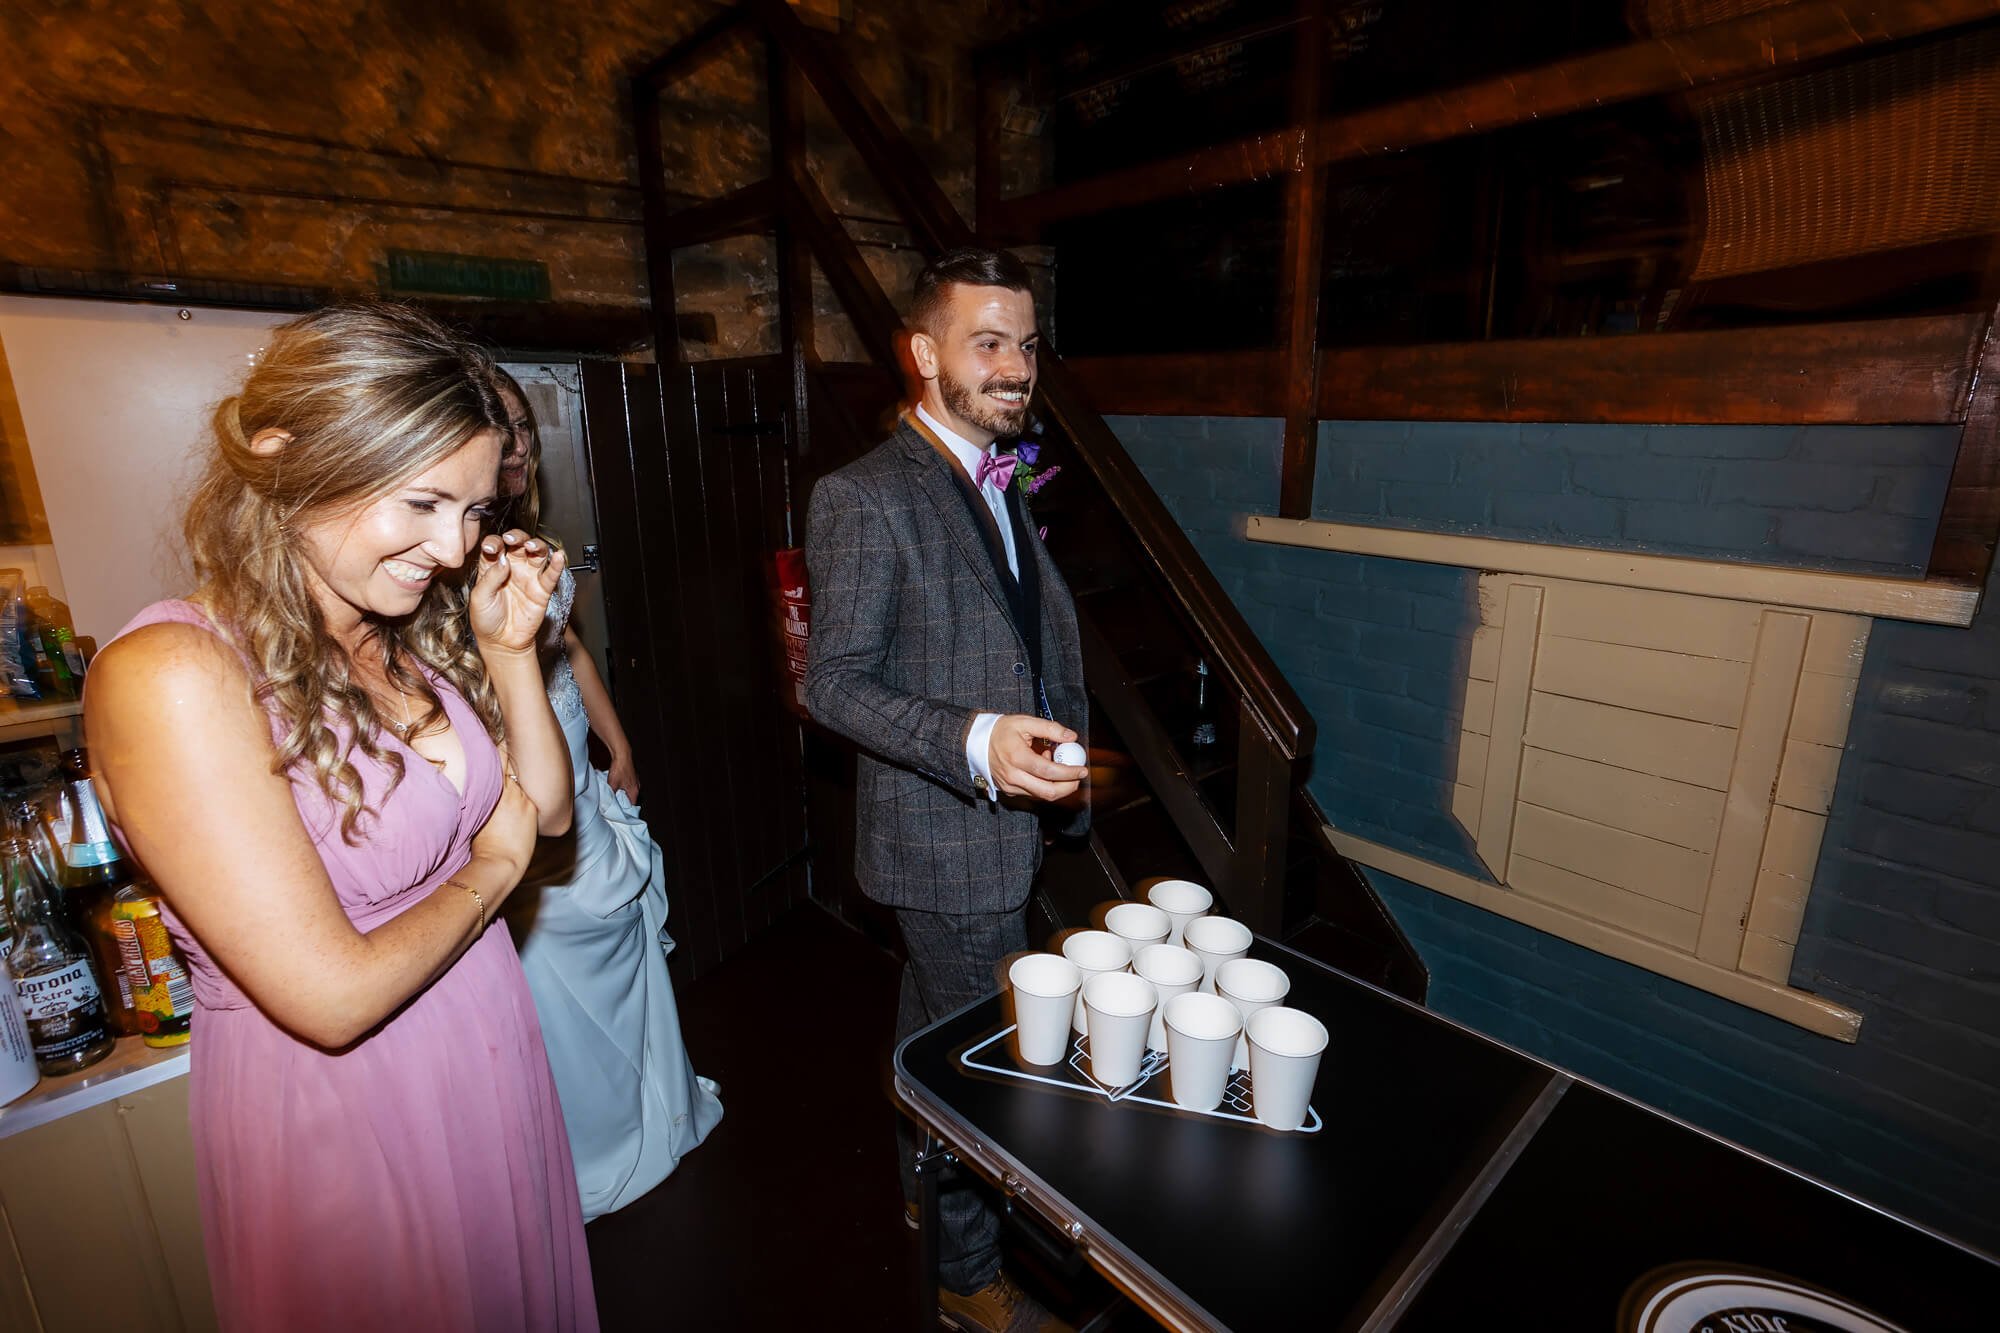 Beer pong at a wedding in Yorkshire